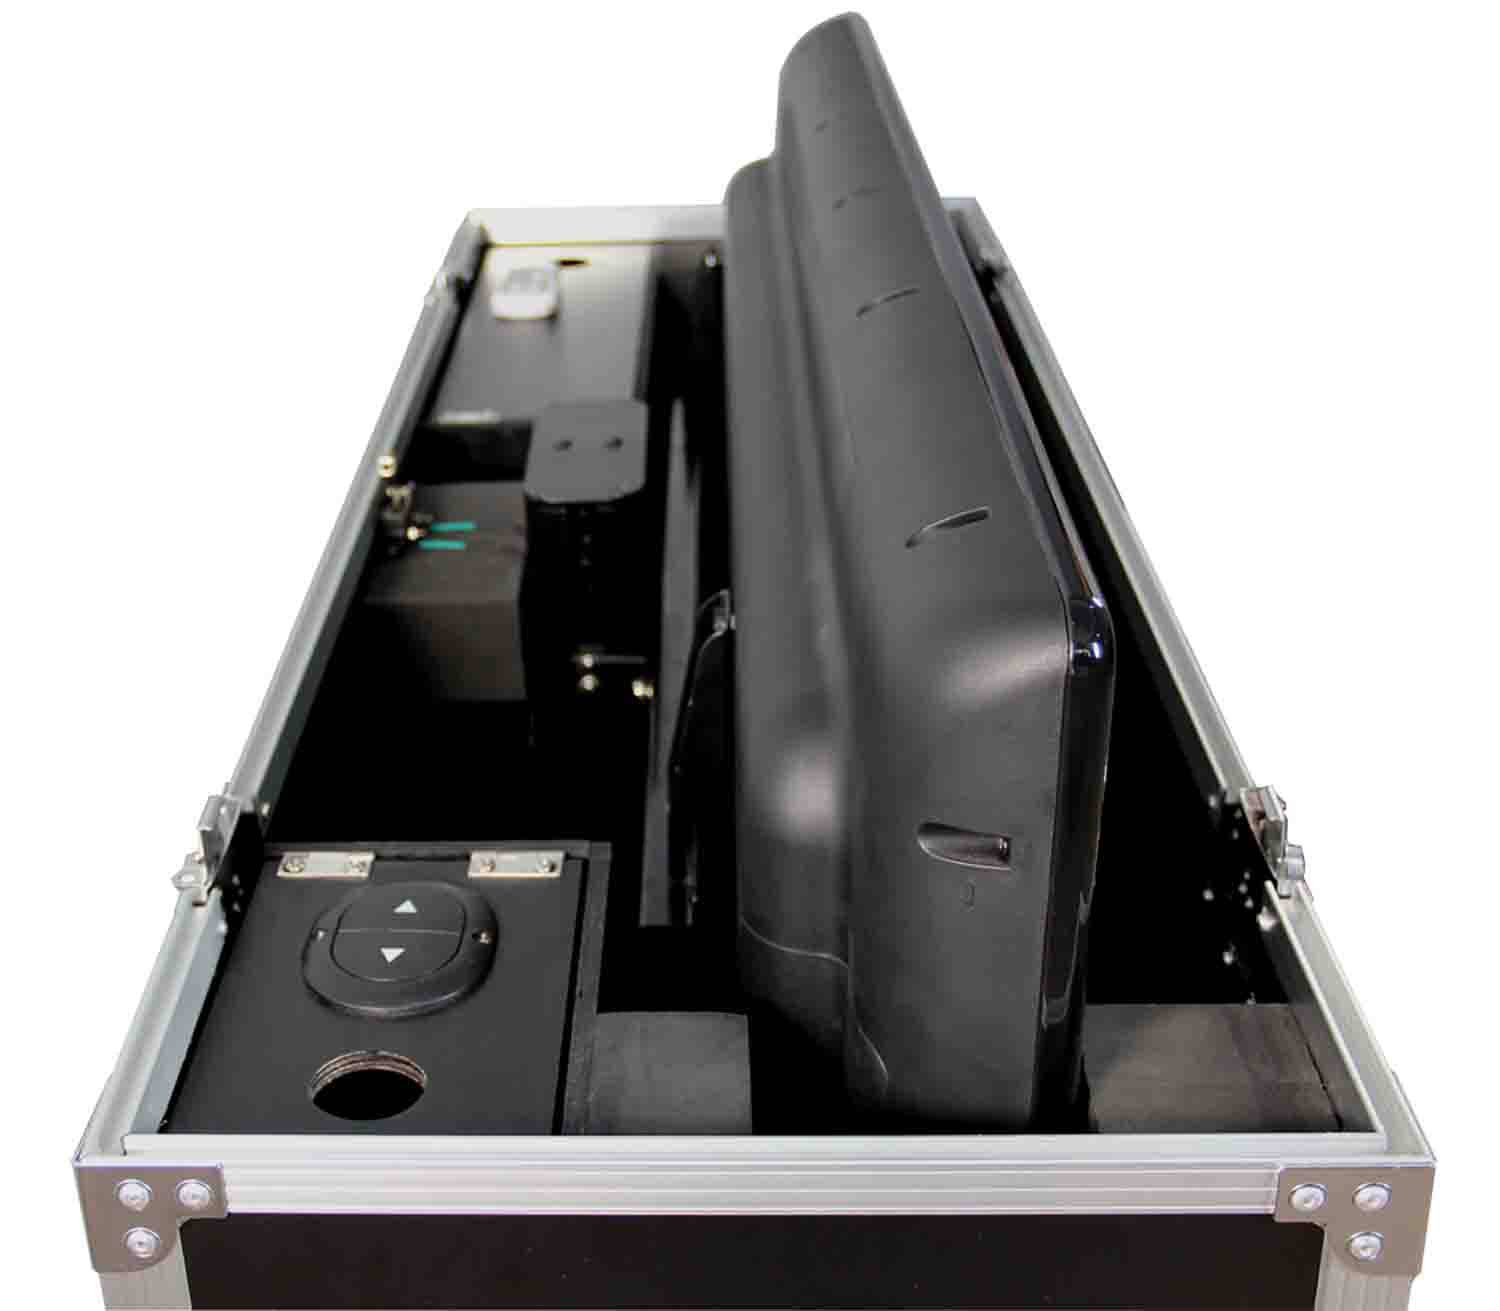 Gator Cases G-TOUR ELIFT 47 Electric Lift Road Case for 47″ LCD or Plasma Screen - Hollywood DJ